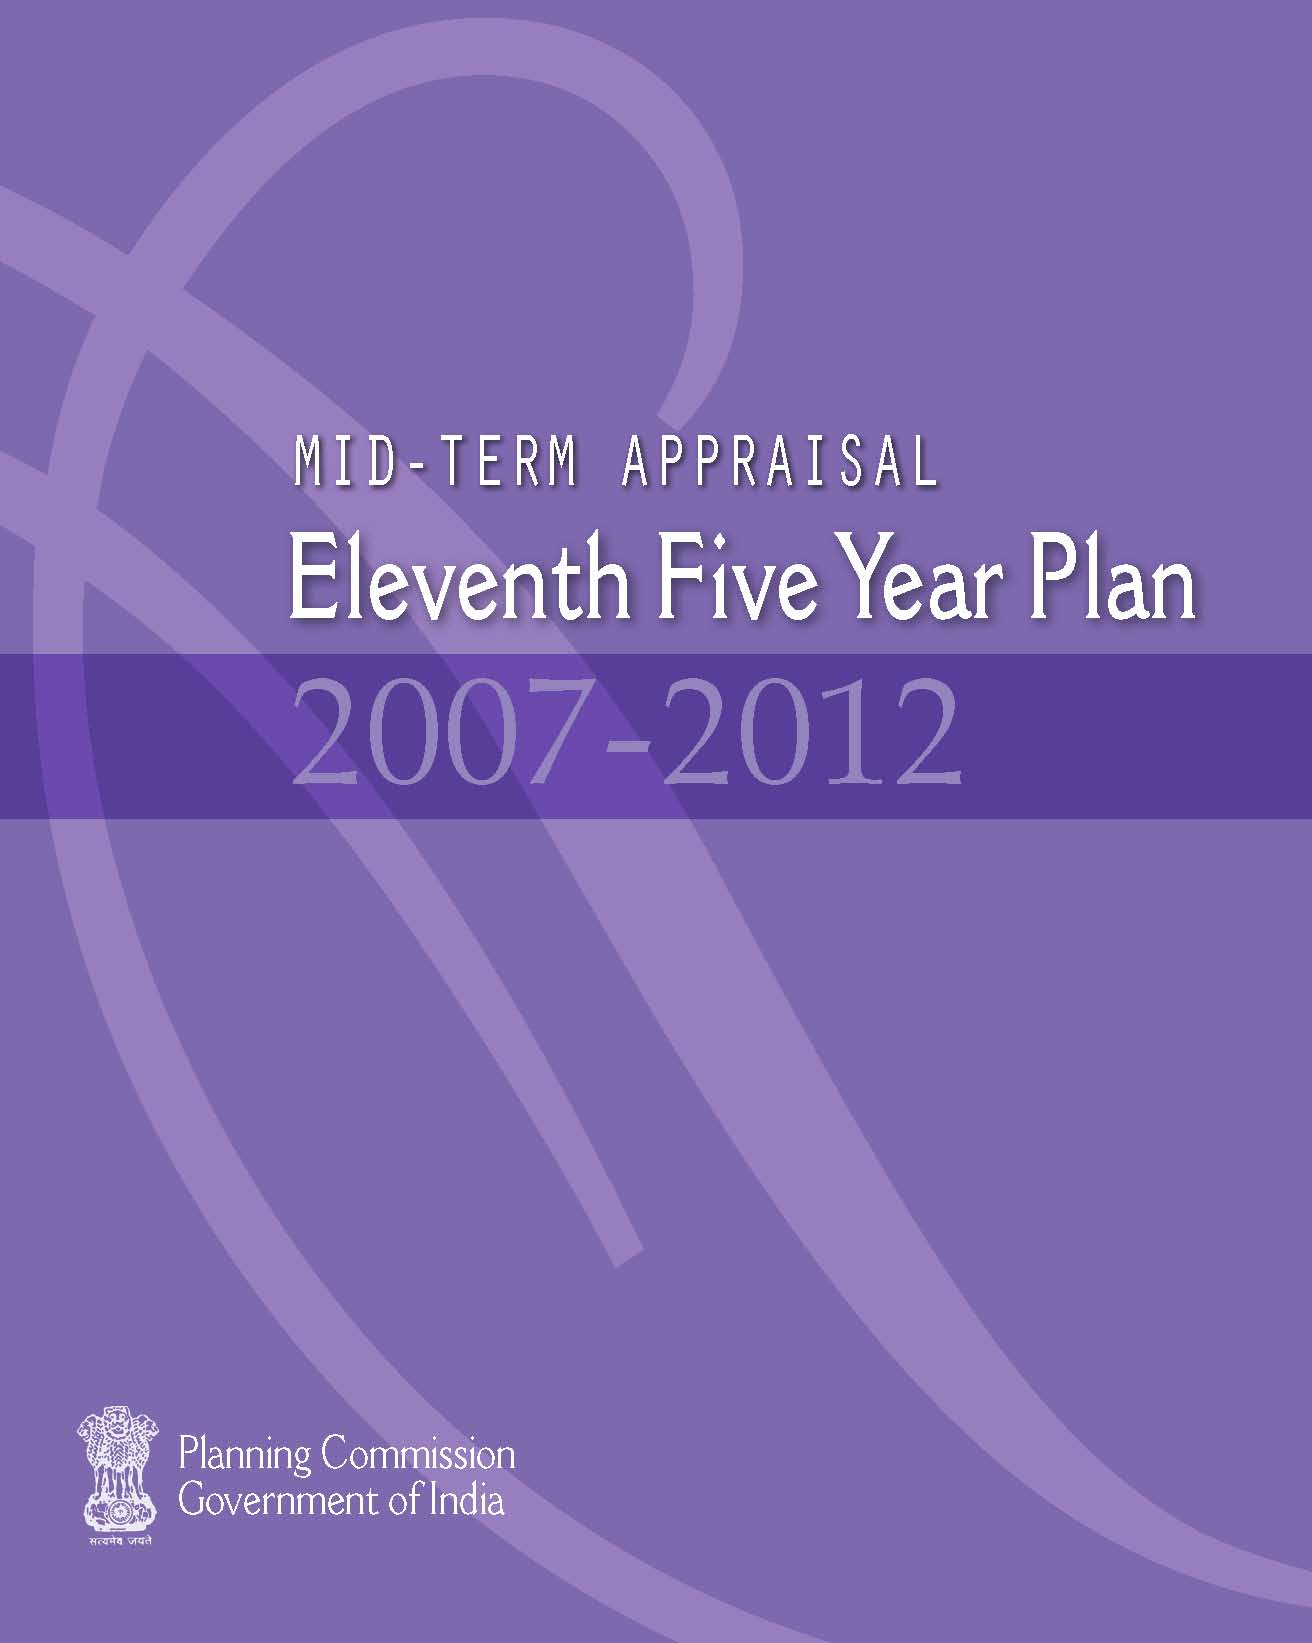 Mid Term Appraisal for Eleventh Five Year Plan 2007-2012